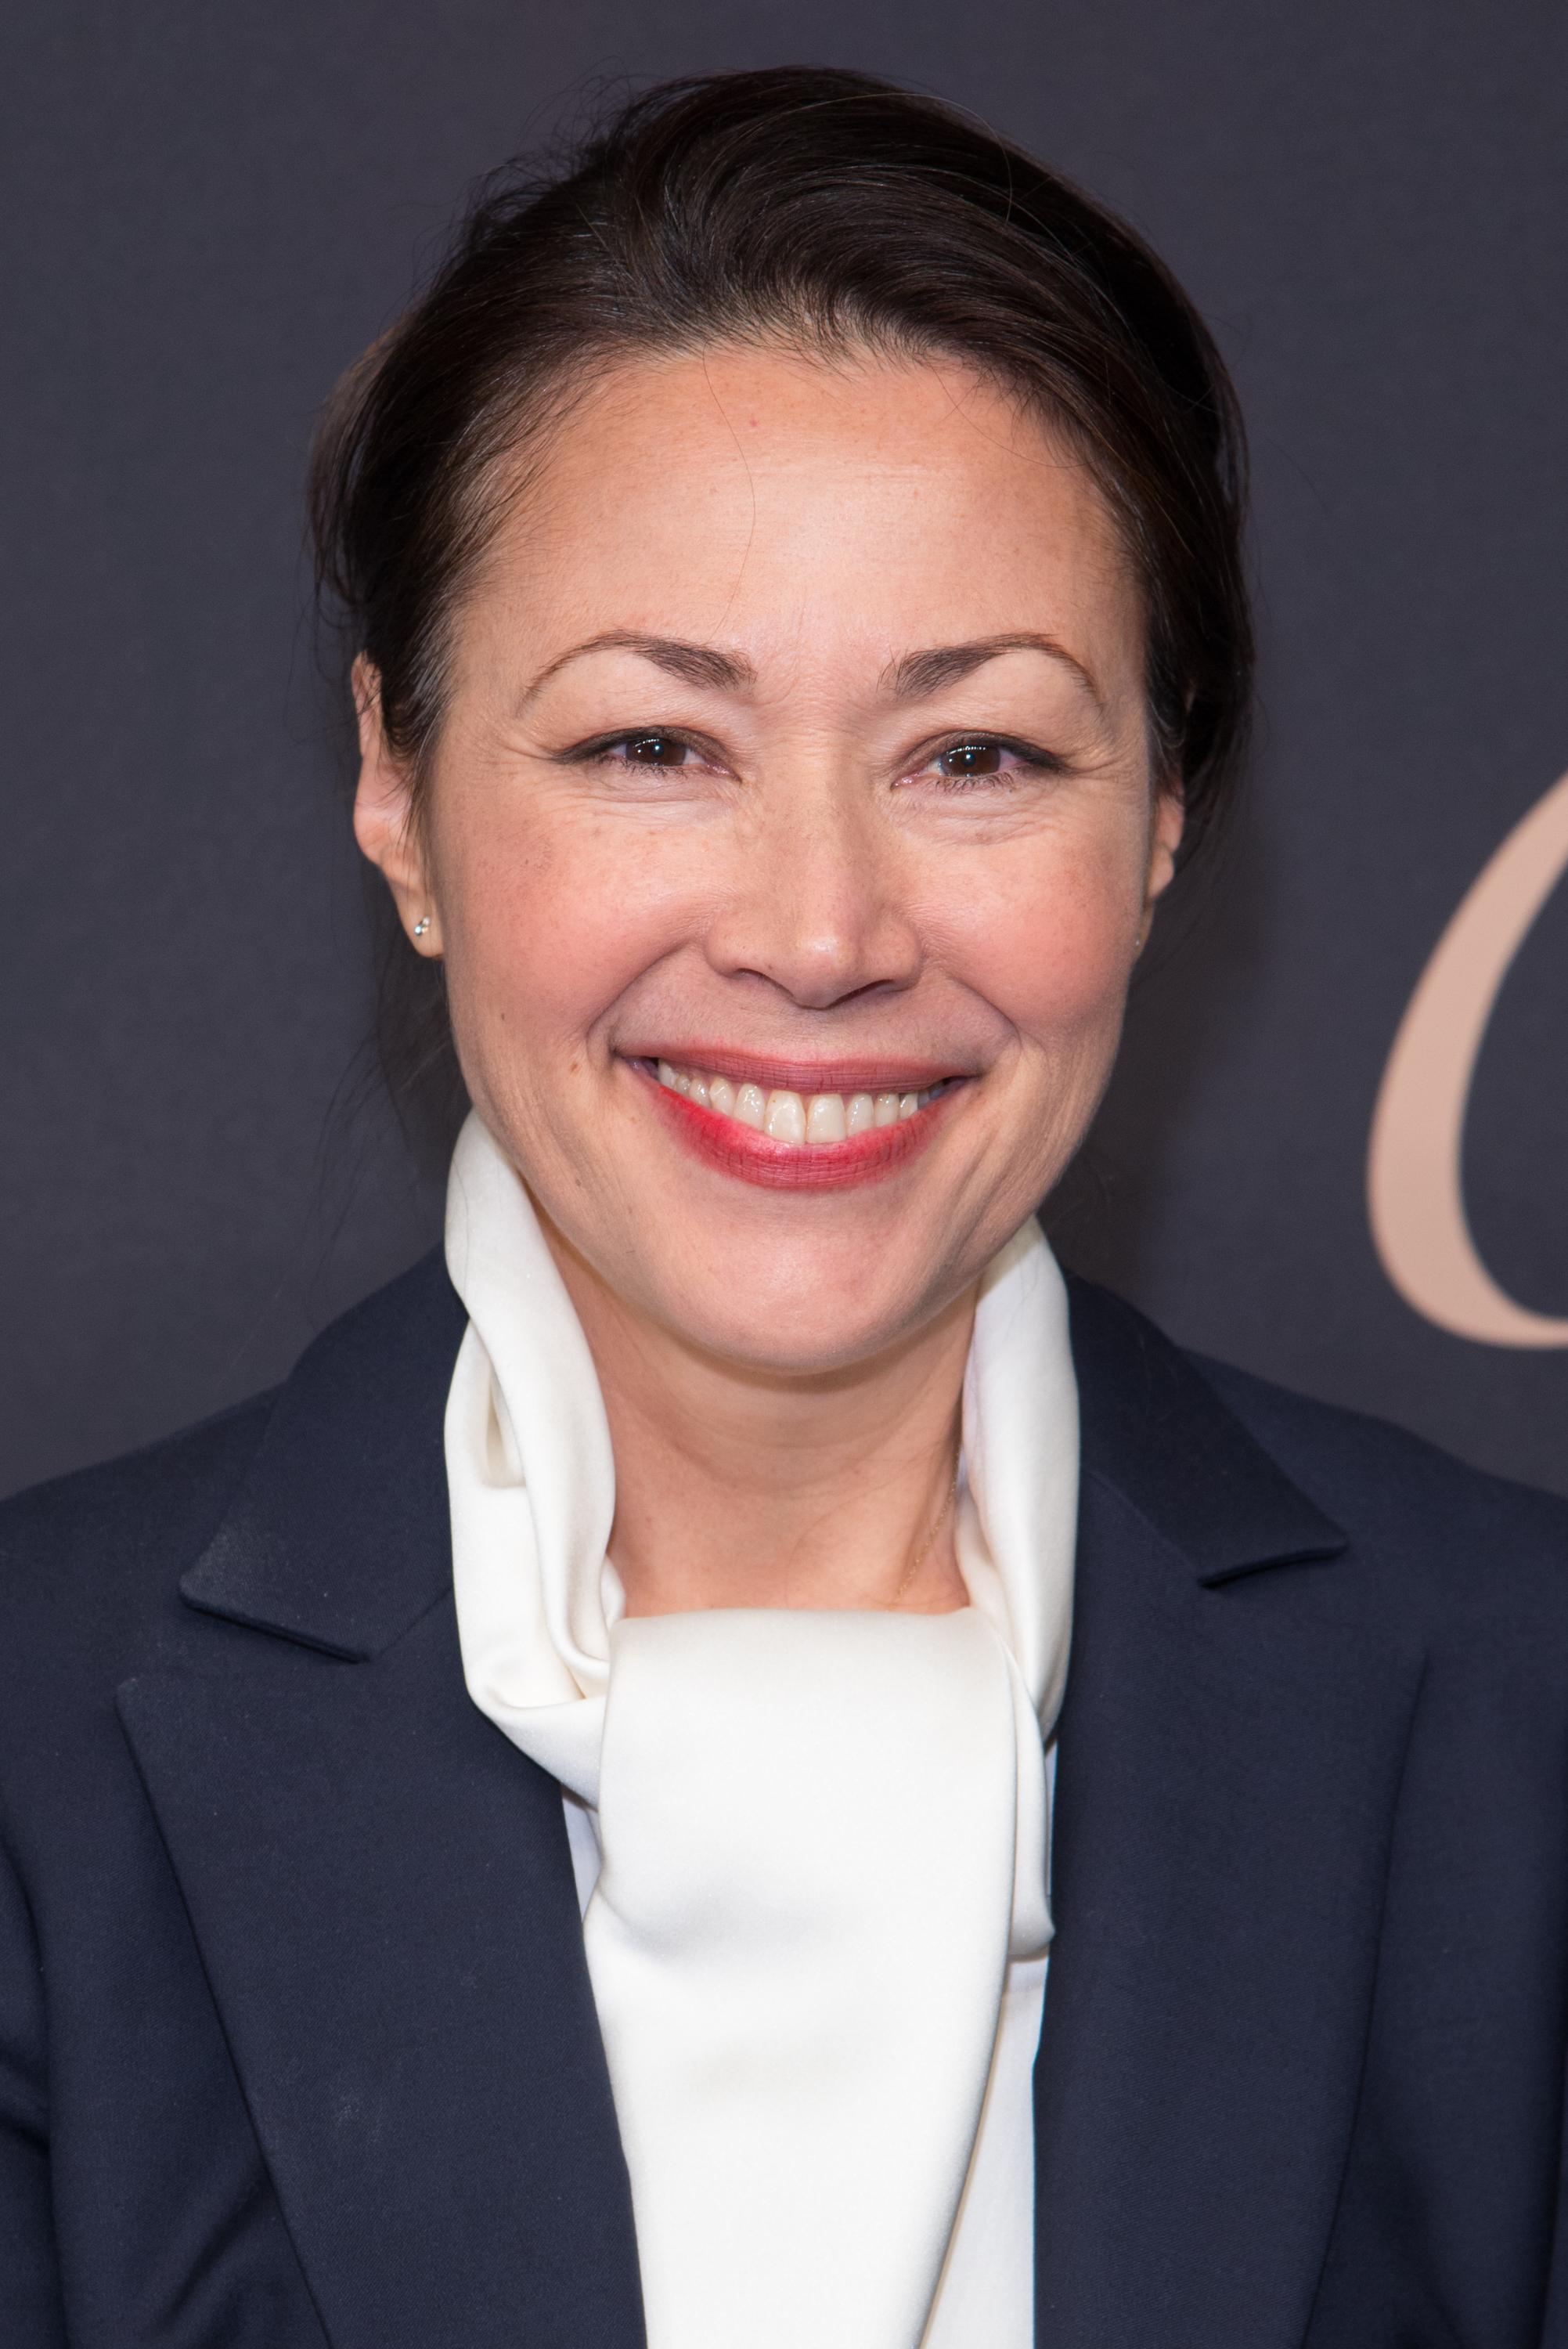 Ann Curry attends the Cartier 100th Anniversary event in New York City on Nov. 12, 2014.